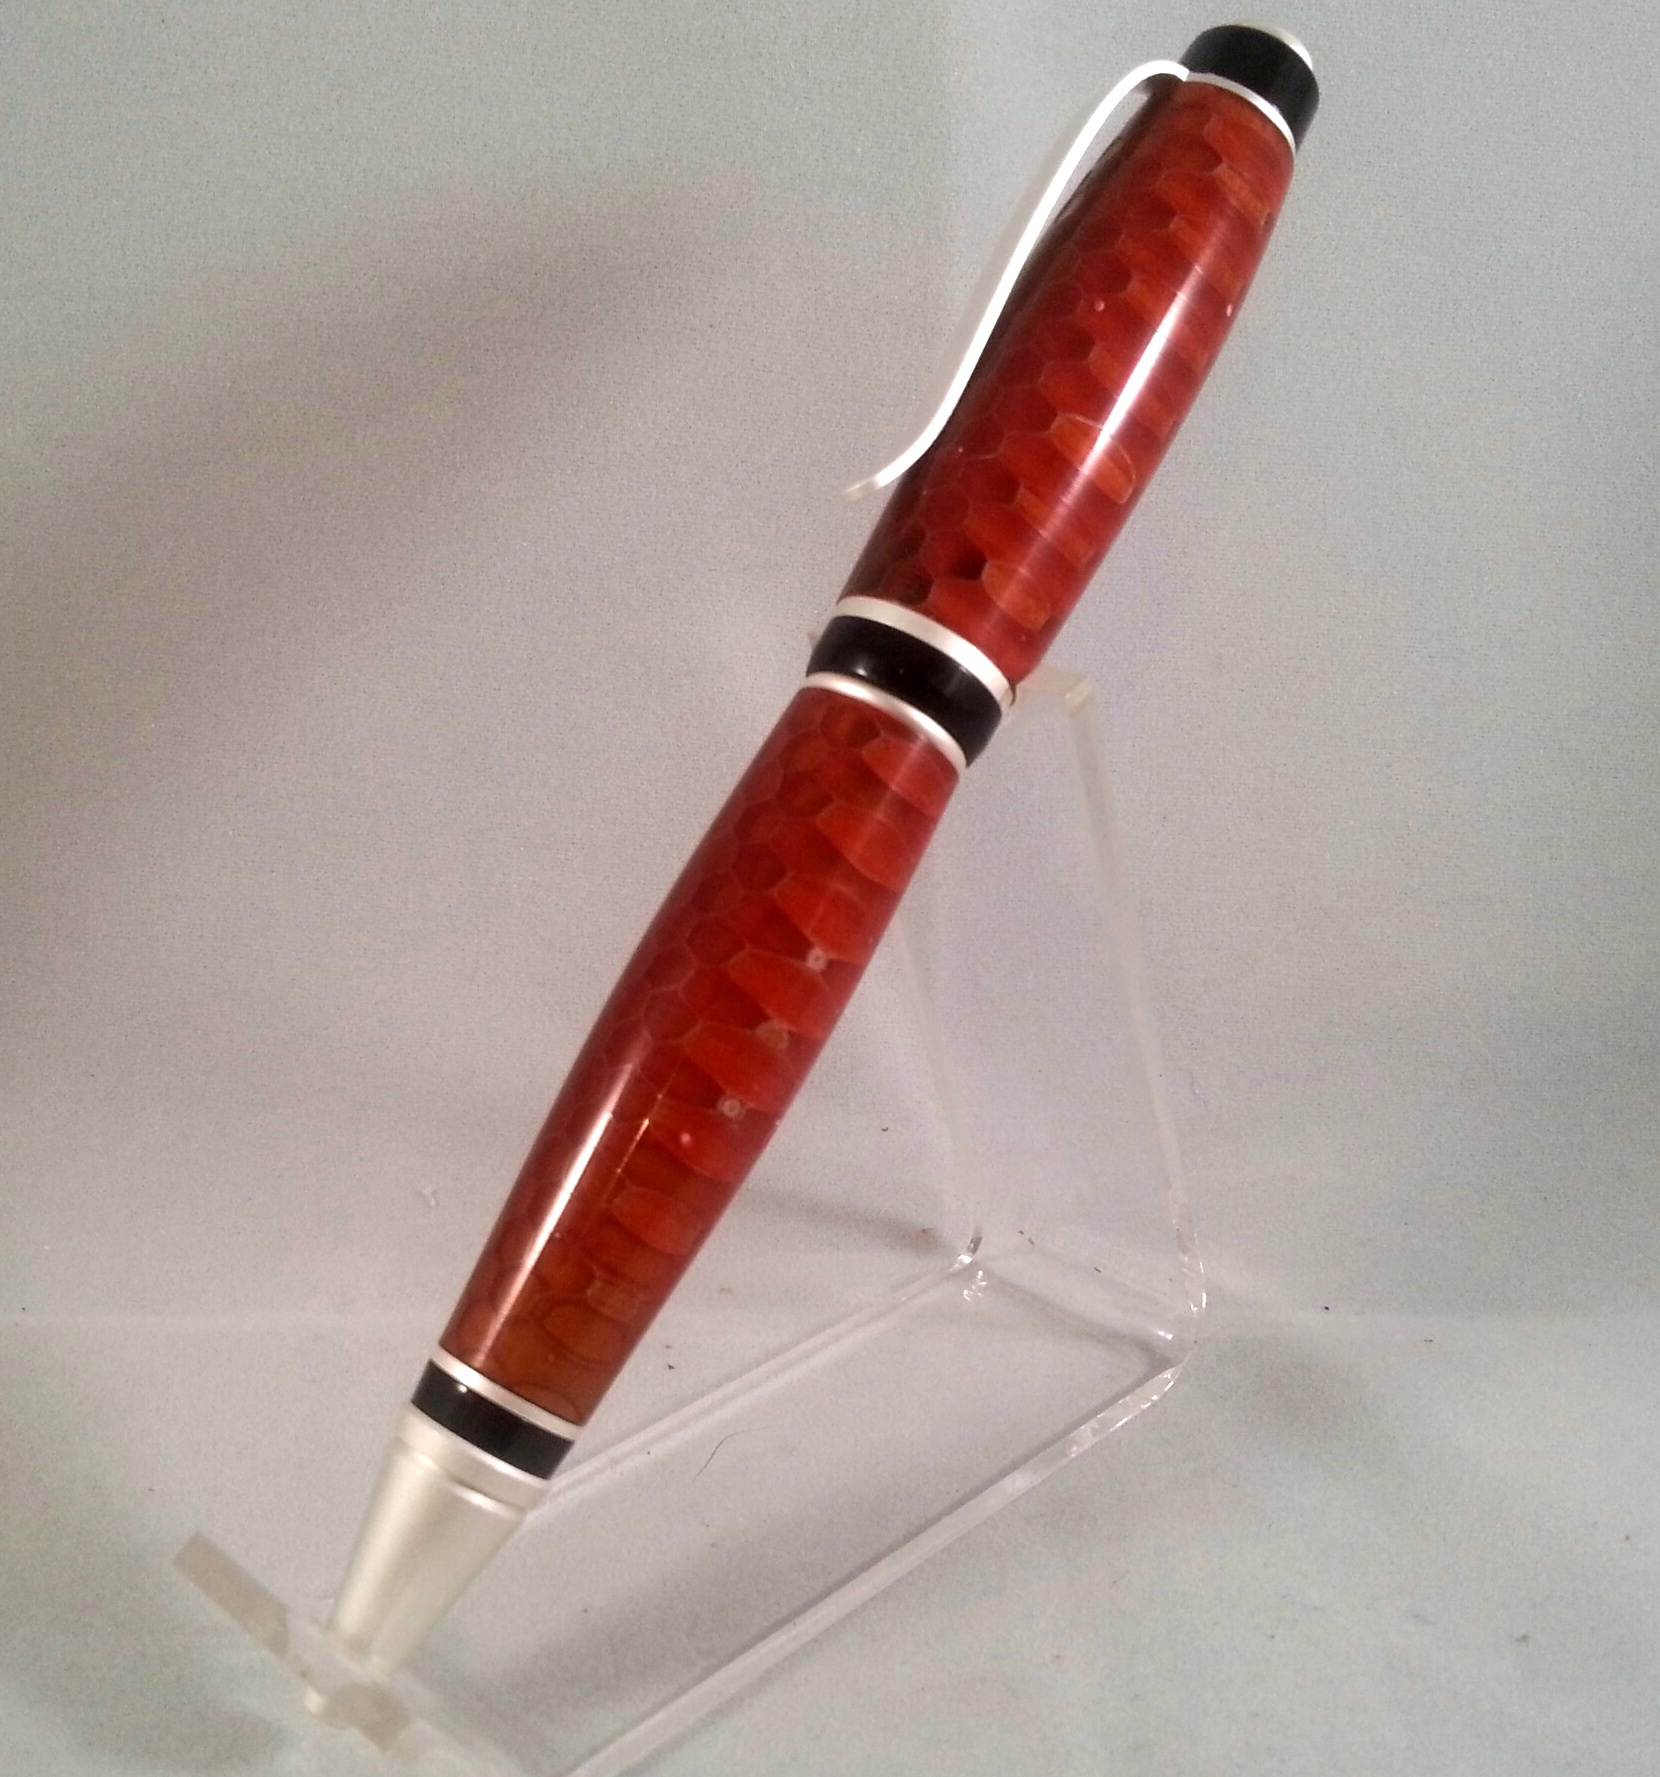 Cigar Pen with Red Honeycomb Blank...